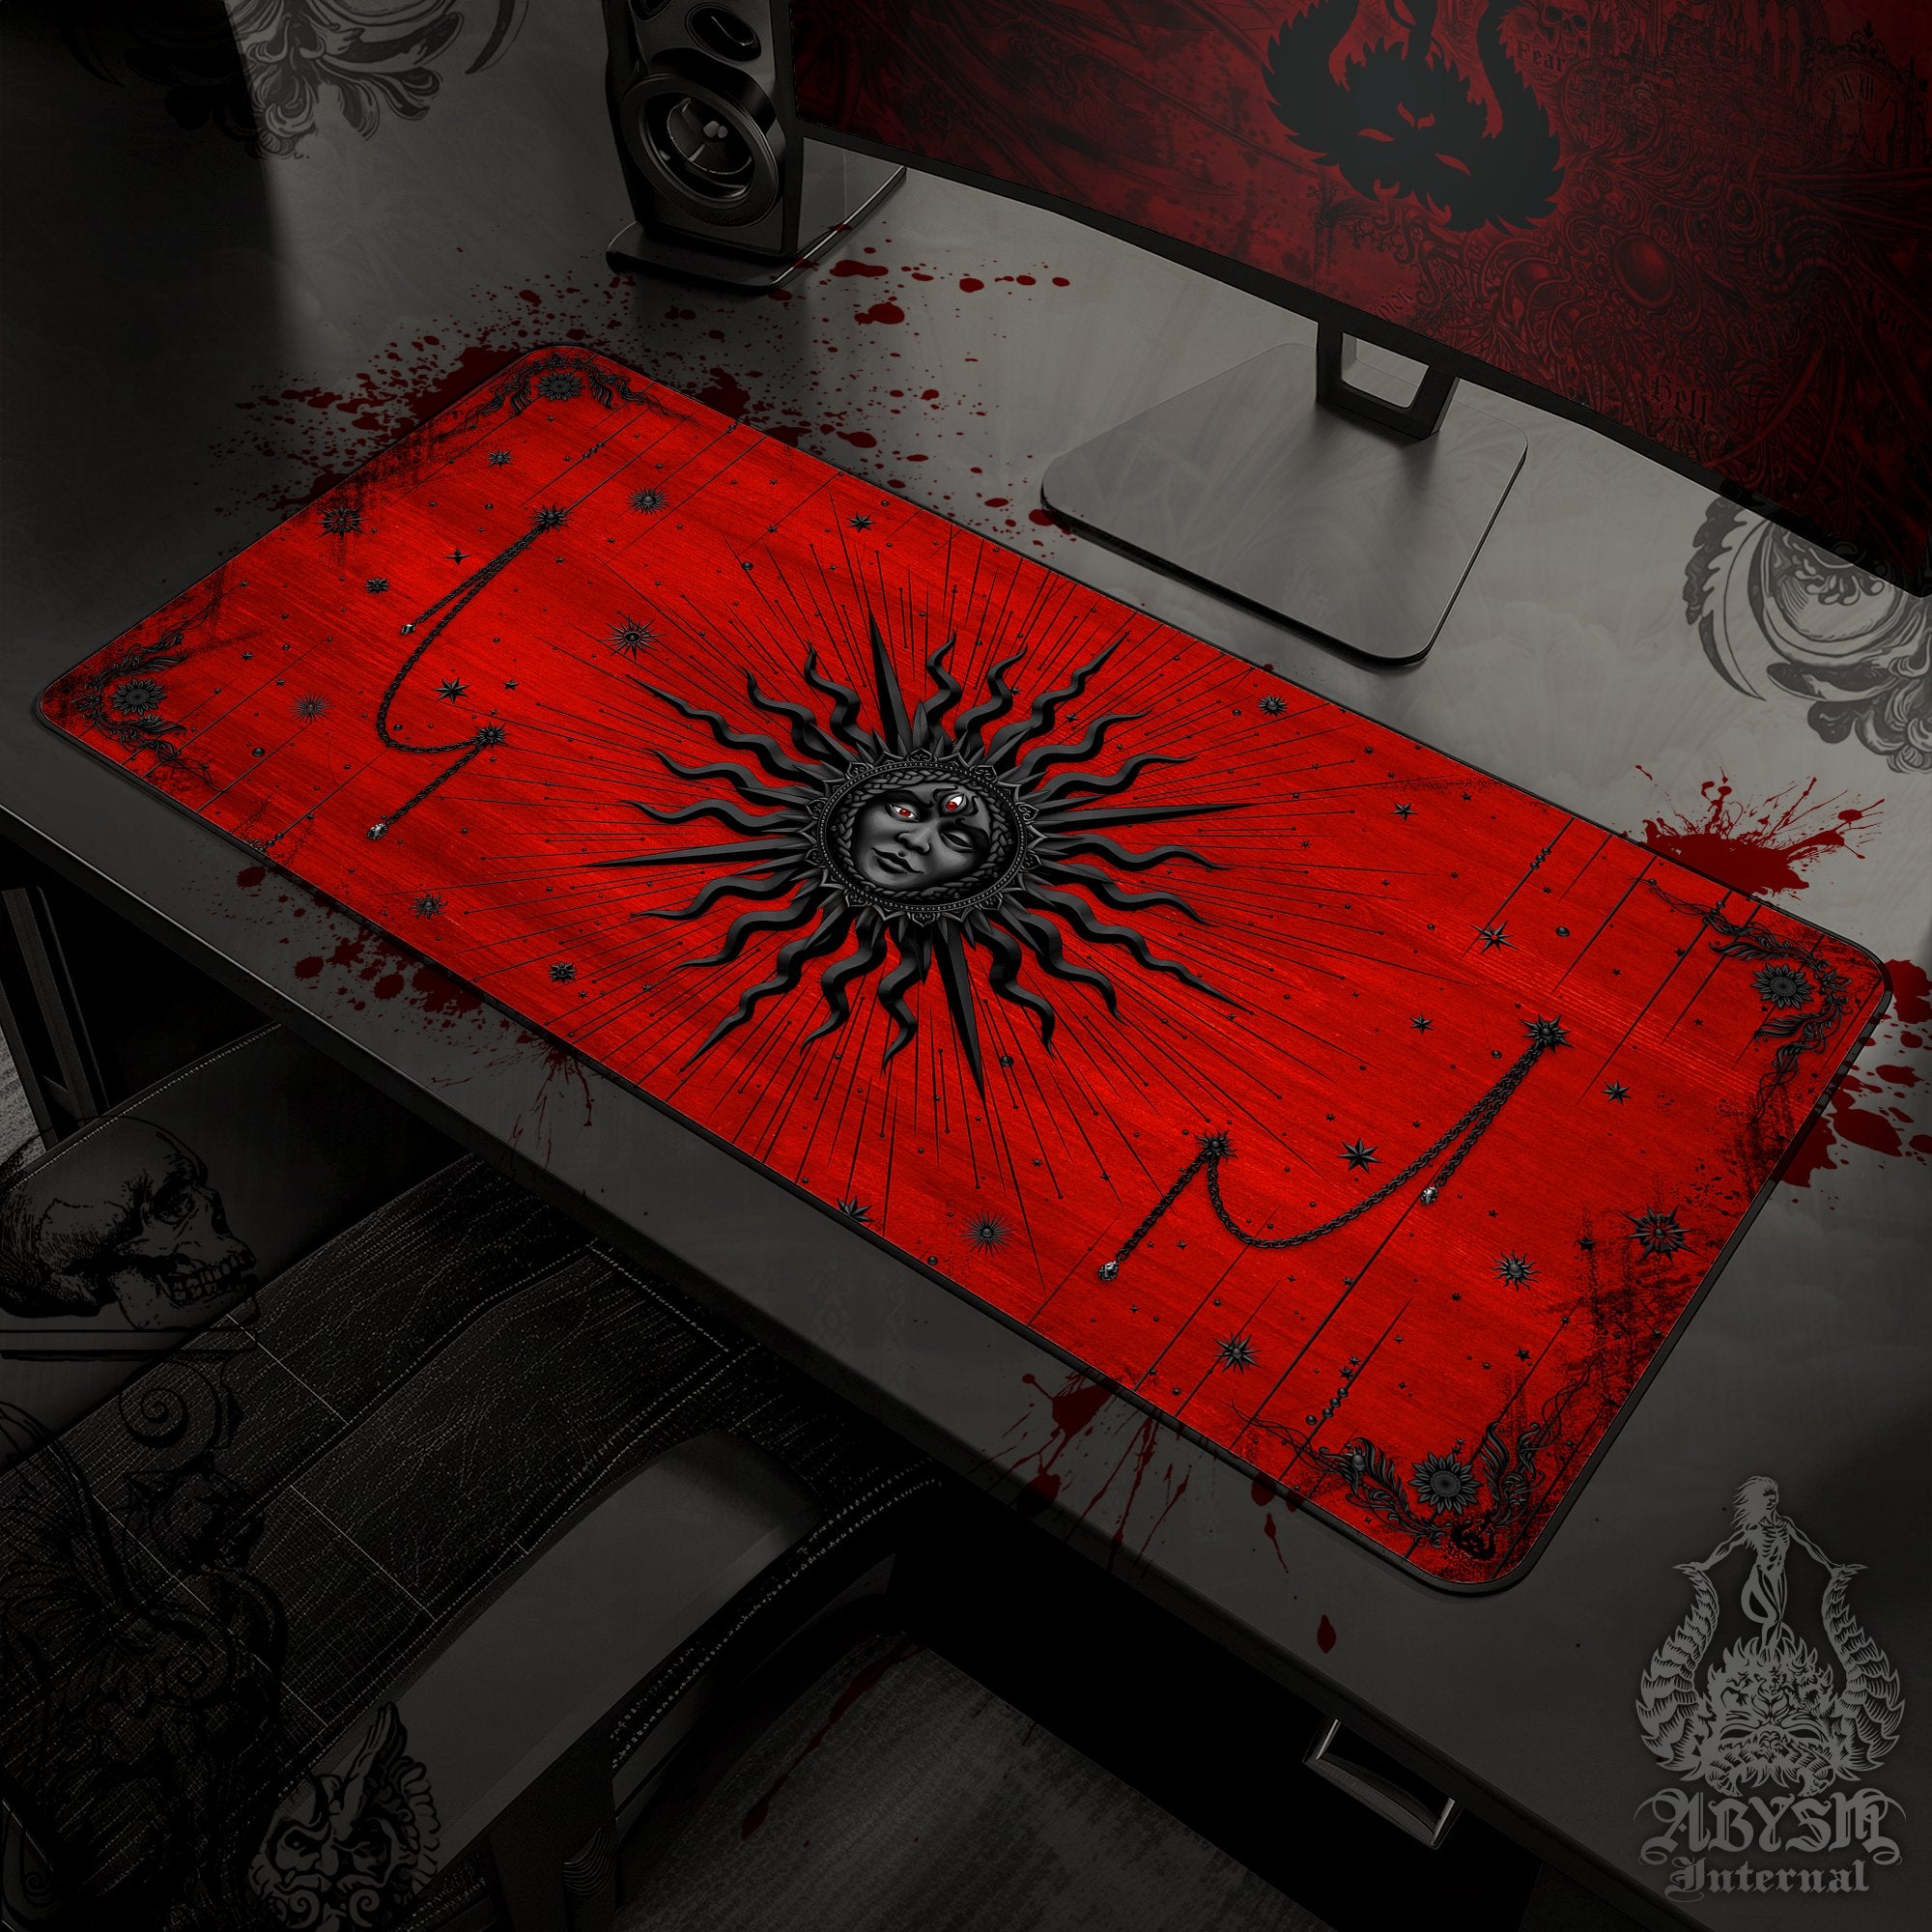 Bloody Gothic Desk Mat, Sun Gaming Mouse Pad, Tarot Arcana Table Protector Cover, Witch Workpad, Esoteric Art Print - Black Red - Abysm Internal